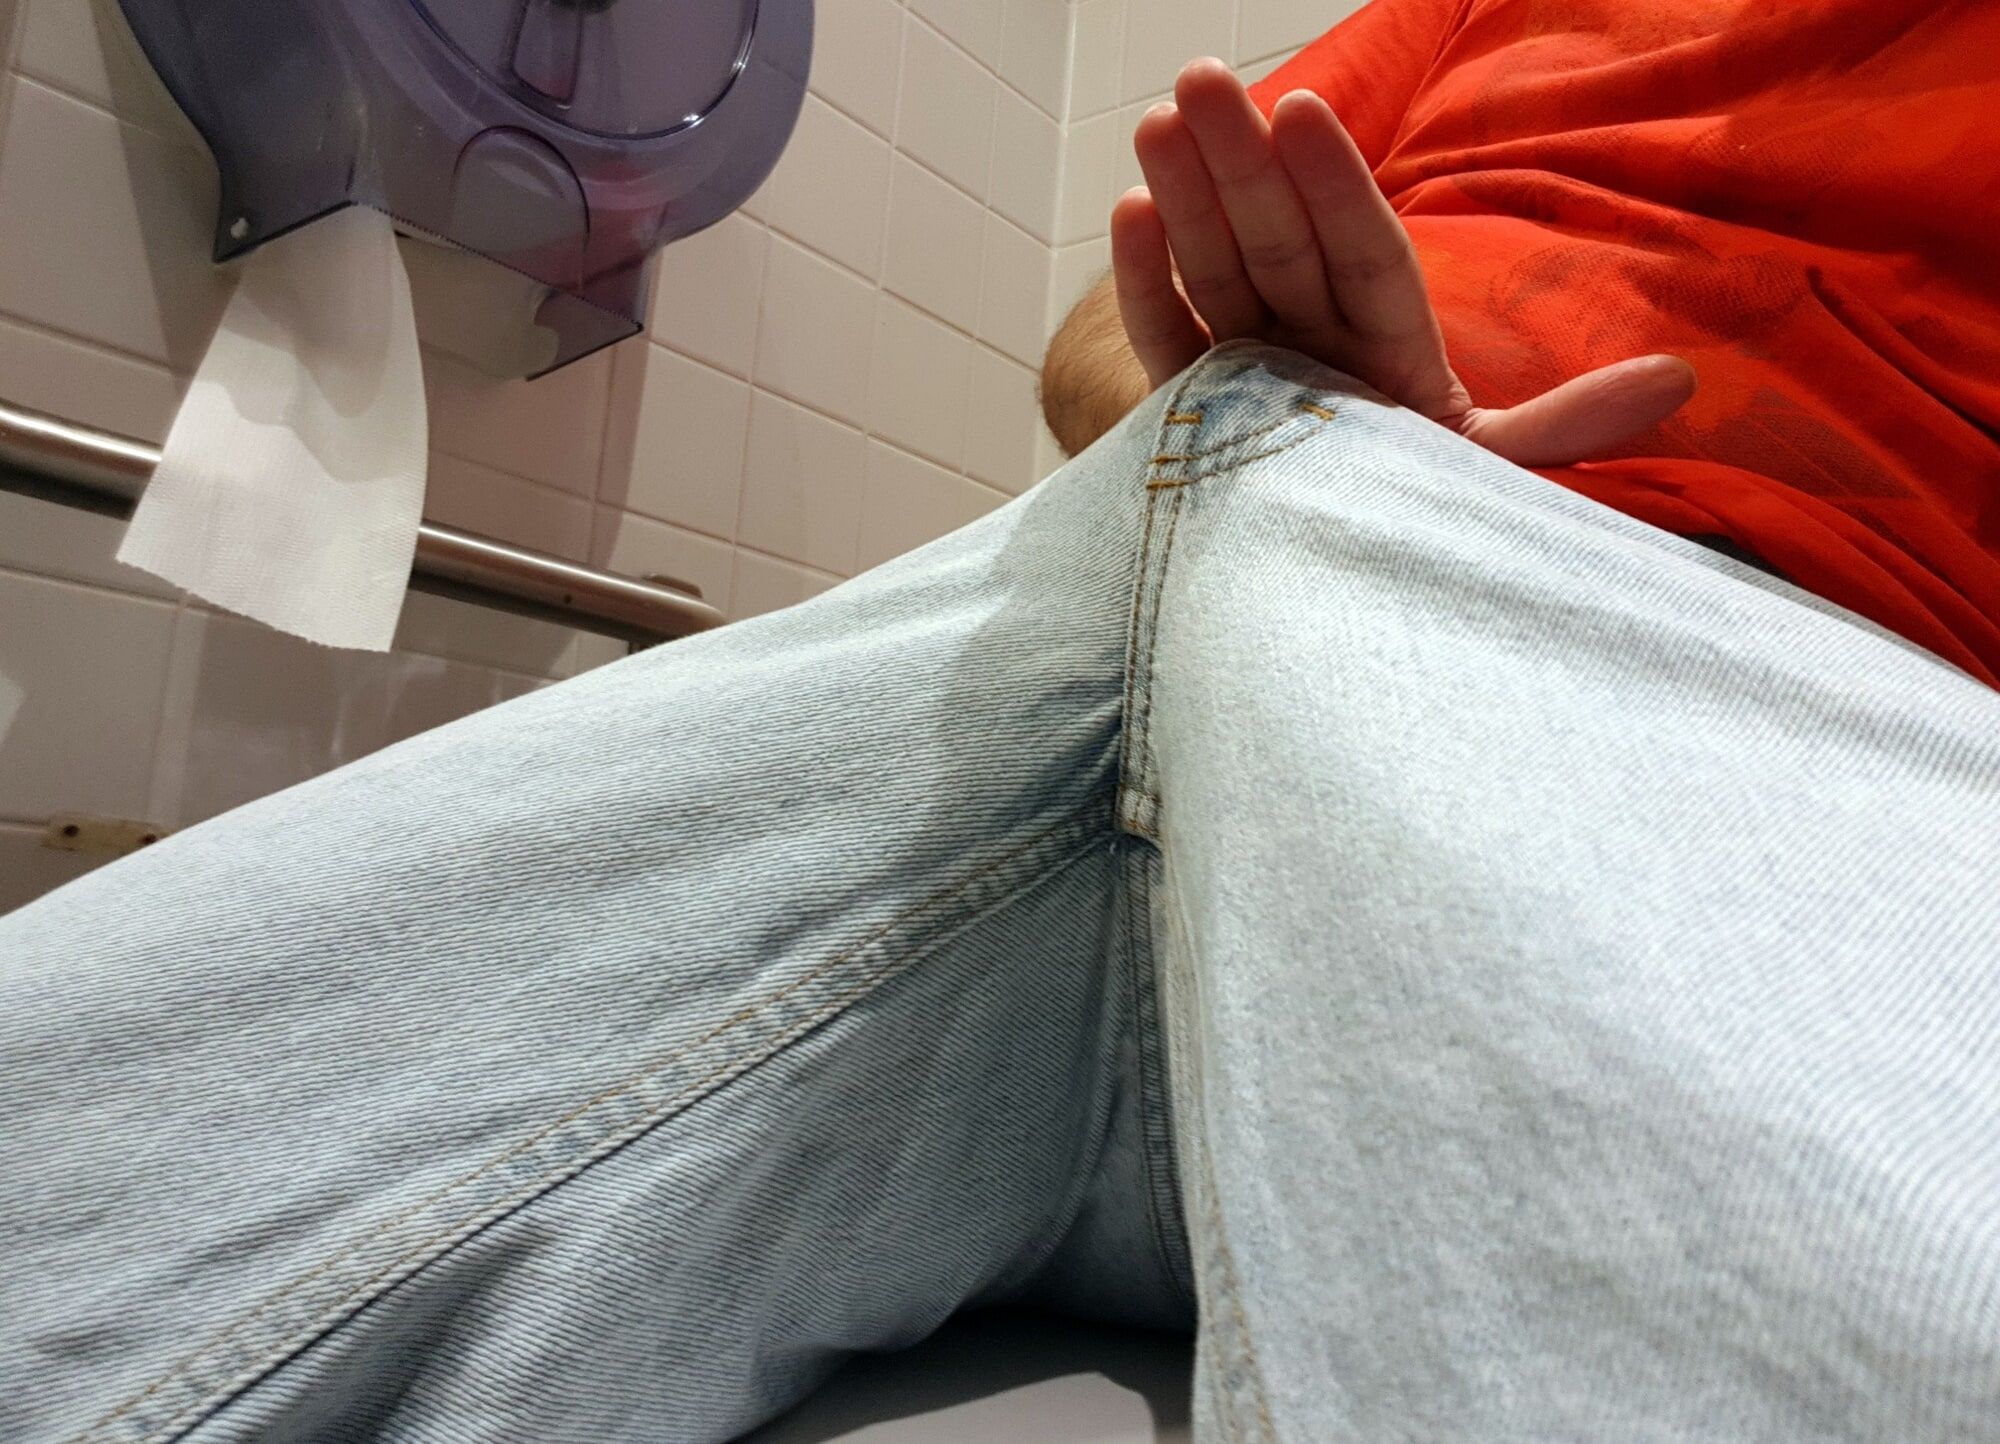 Erection in pants #2